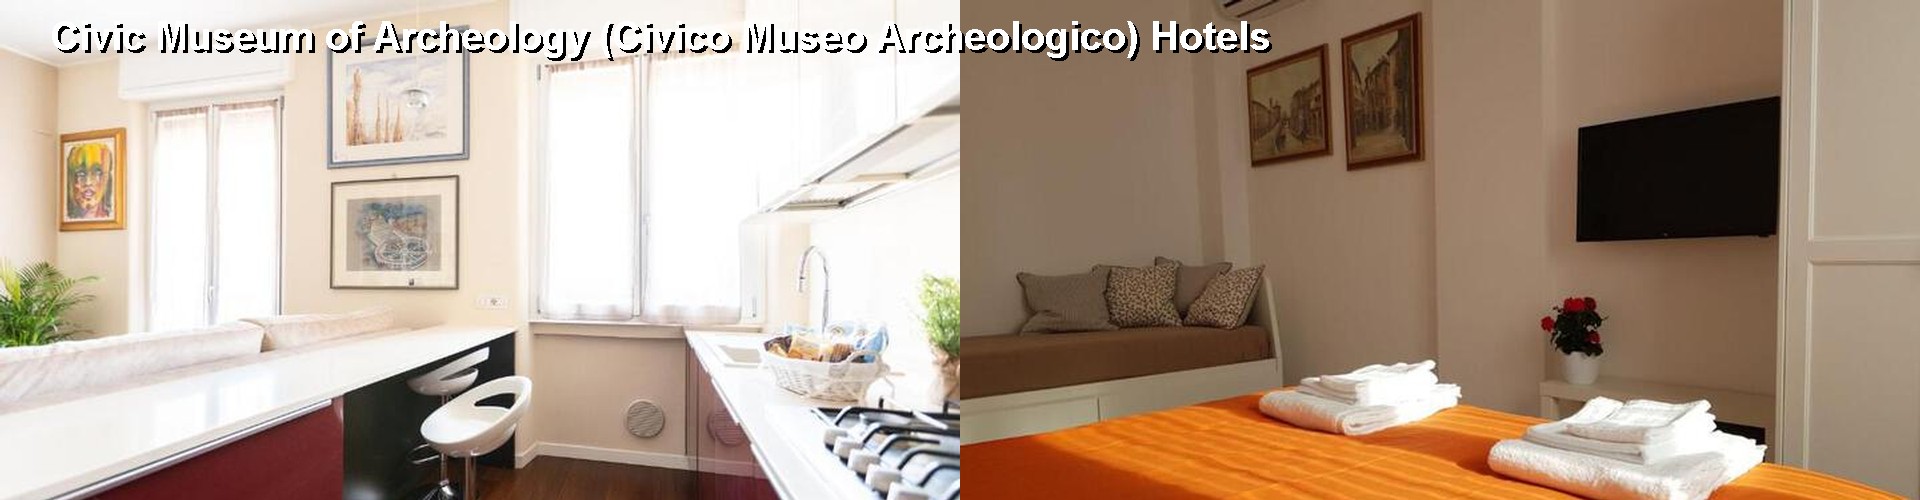 5 Best Hotels near Civic Museum of Archeology (Civico Museo Archeologico)